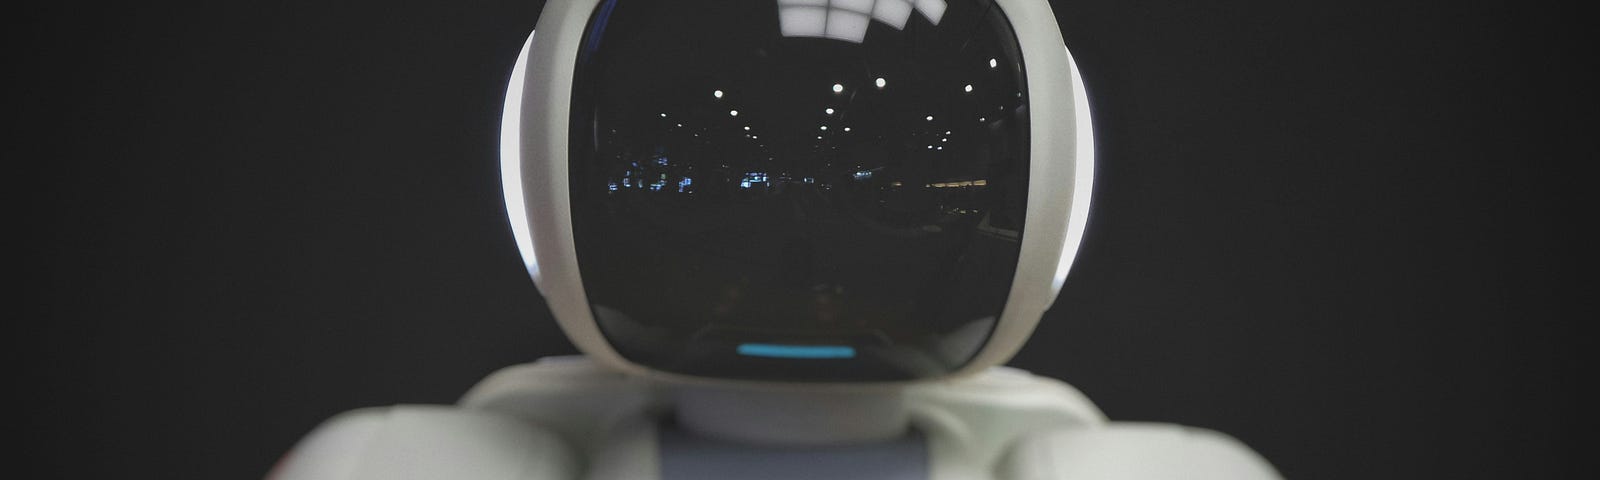 A toy-like robot faces the camera. Its face is a black screen similar to a computer monitor.